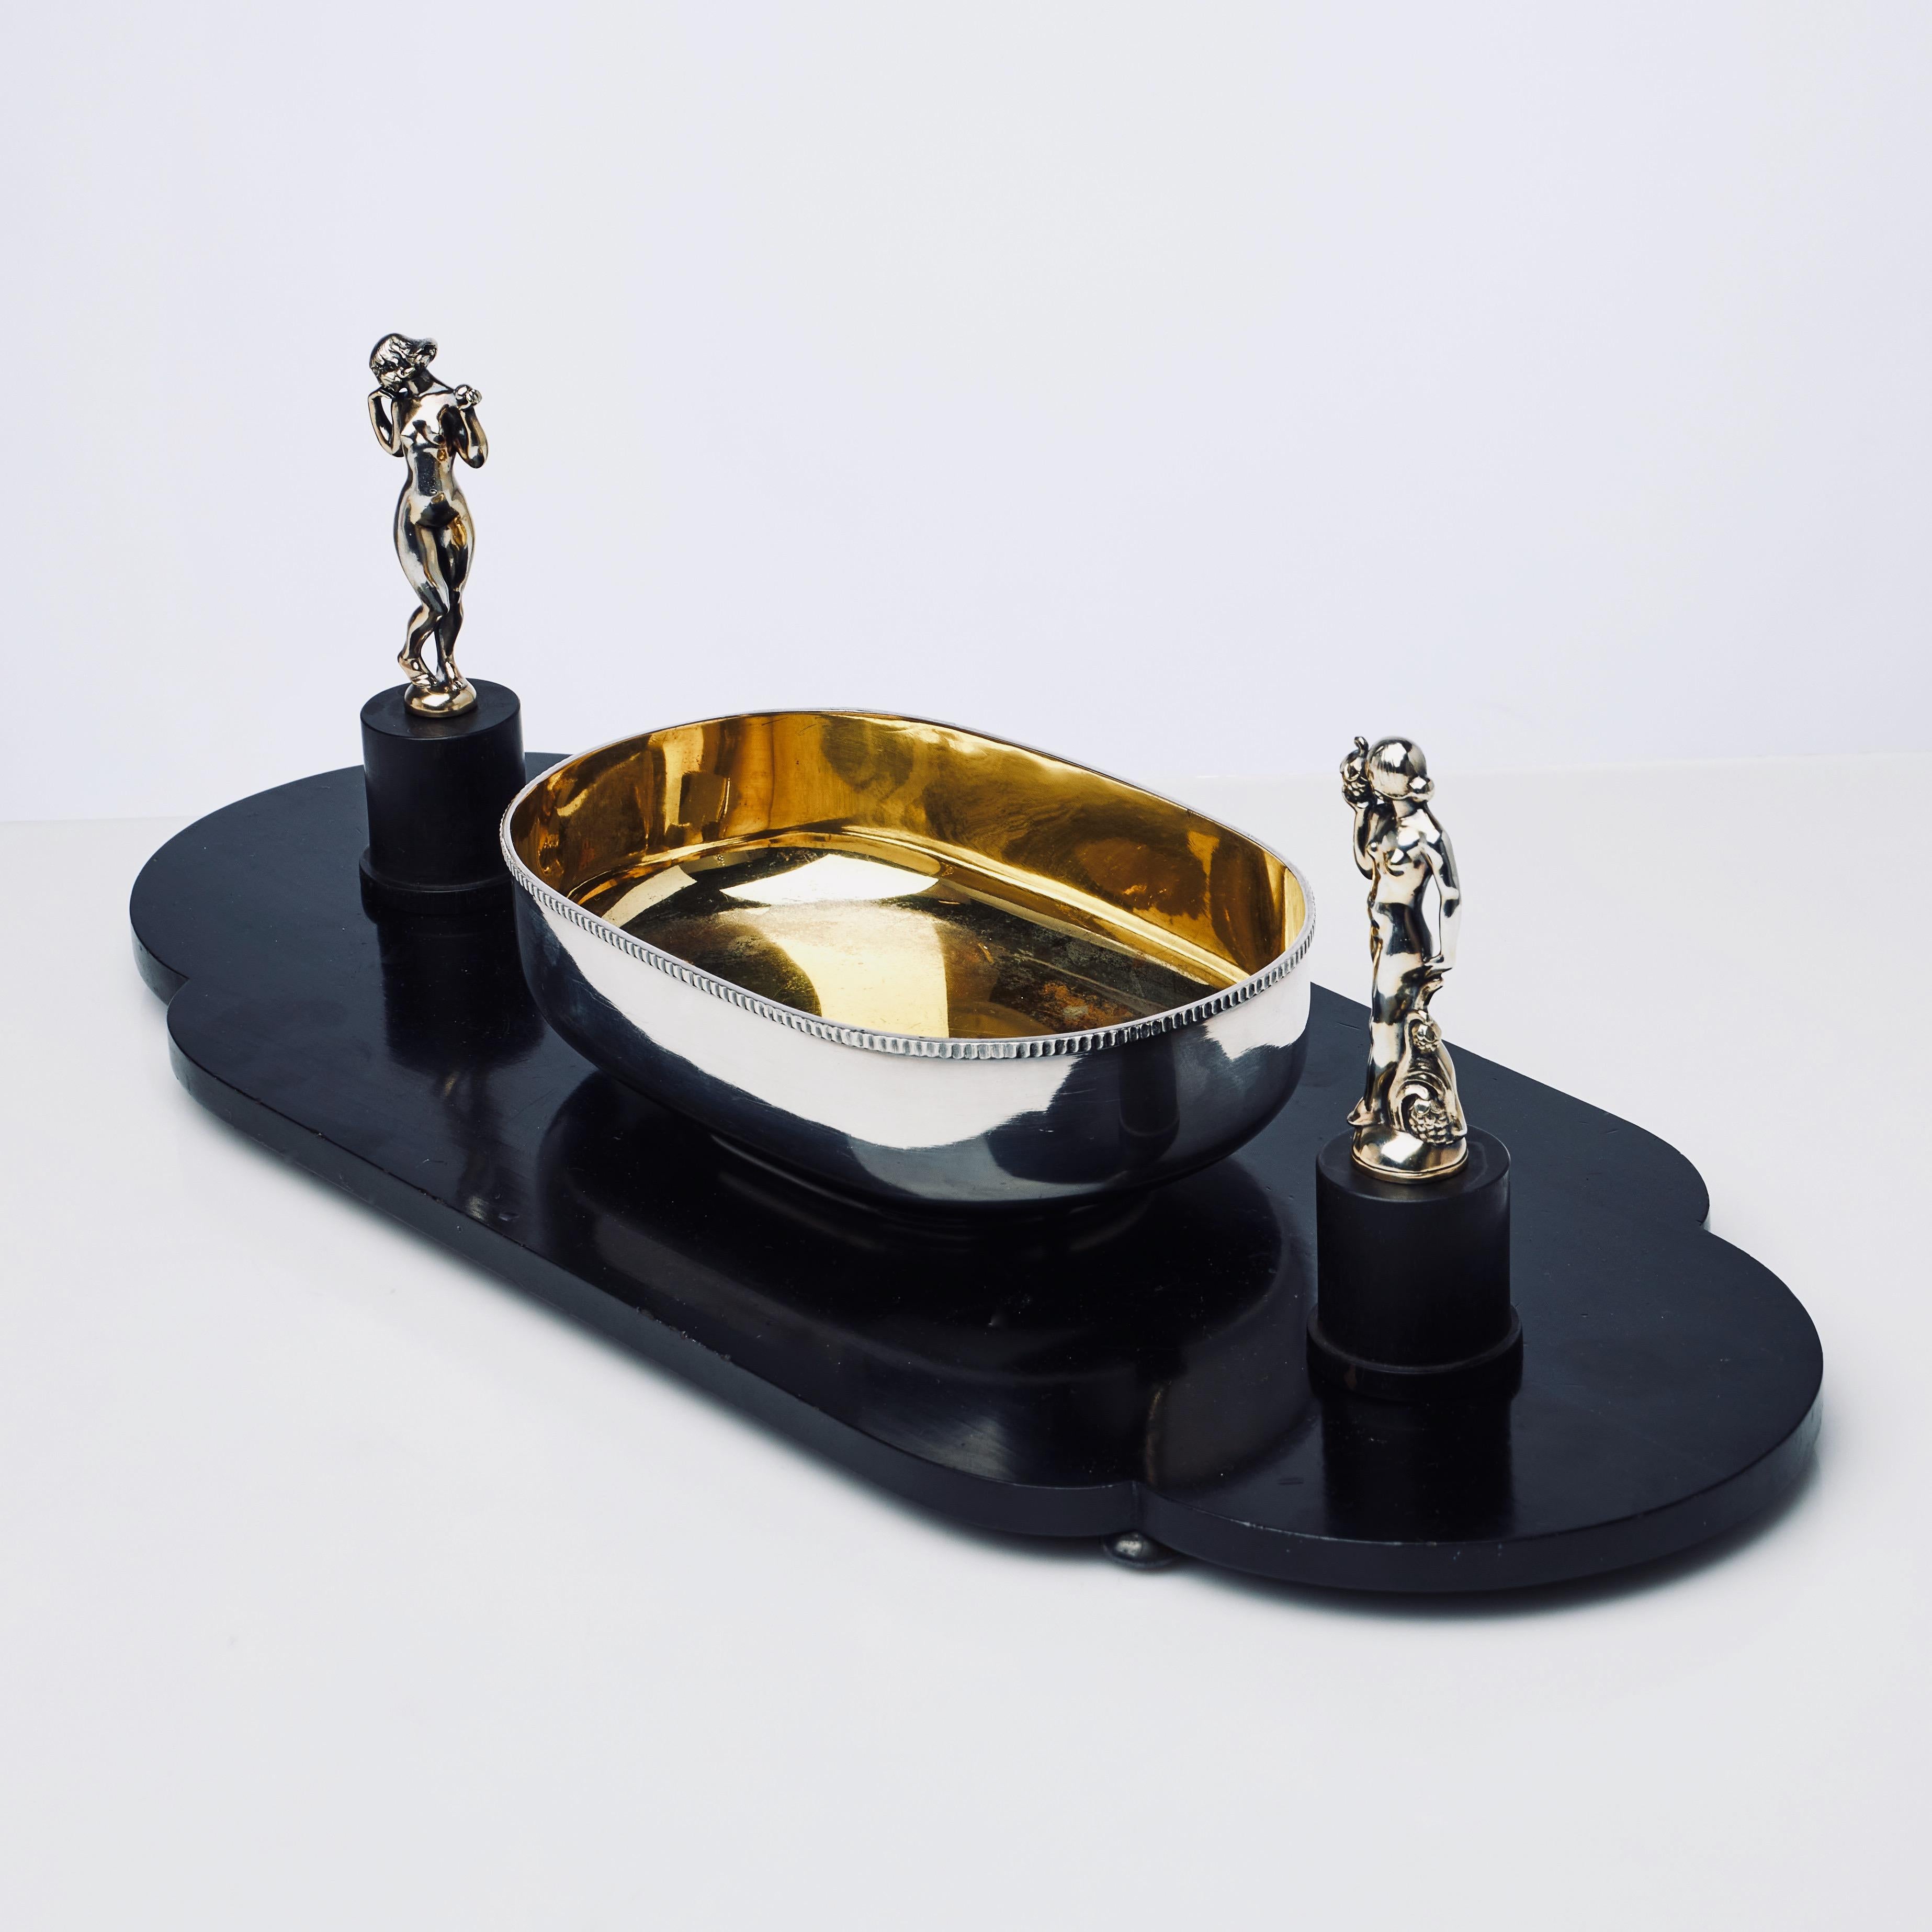 A very decorative and unique silvered bronze and ebony centerpiece made as a prototype by Gustaf Janson (1892-1979), for the Swedish court appointed, jeweler C.G Hallberg,  Made around 1925-1930, in the Swedish Grace or Art Deco style. This